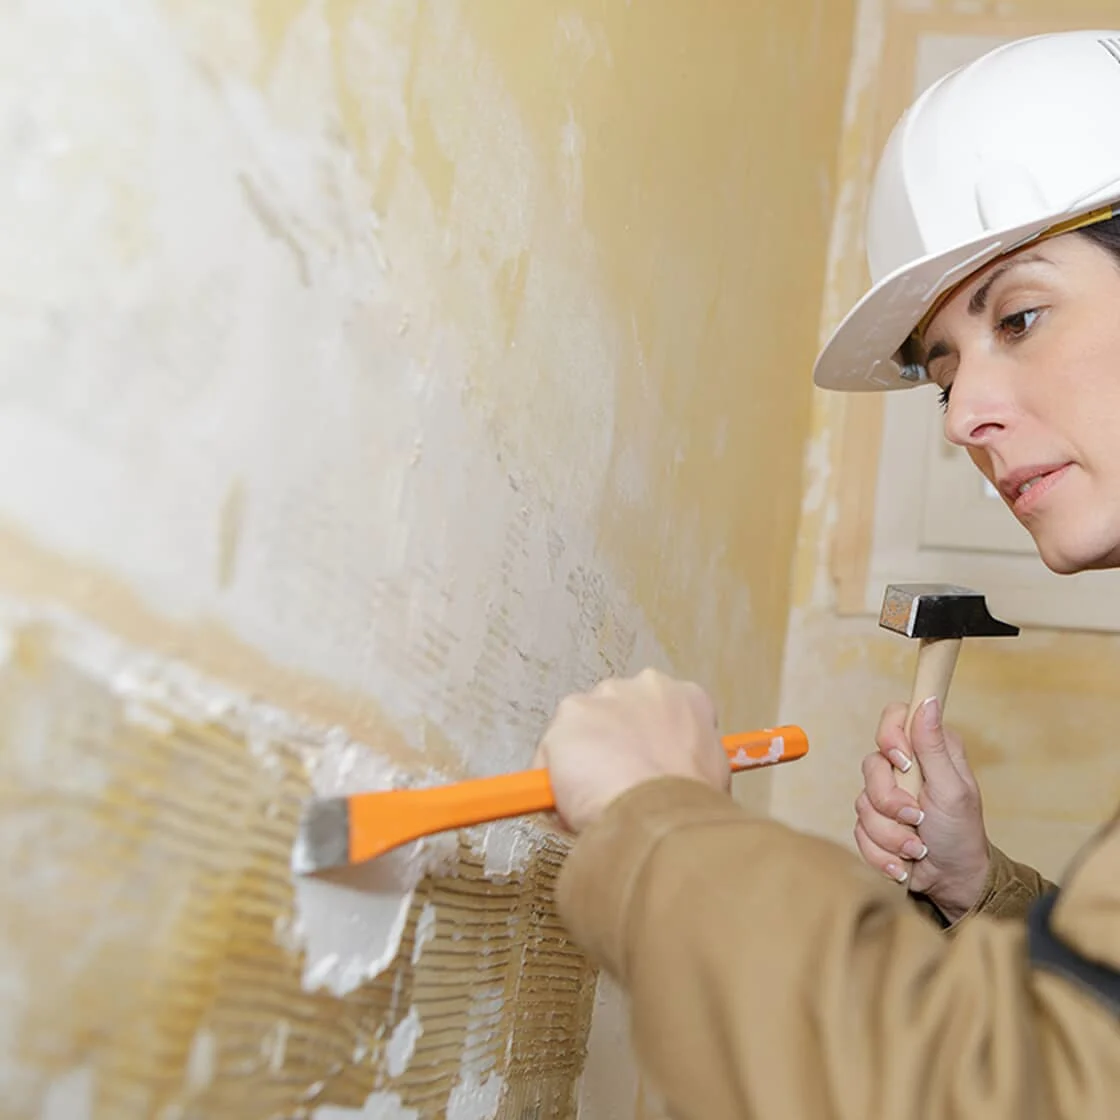 Person scrapping plaster walls